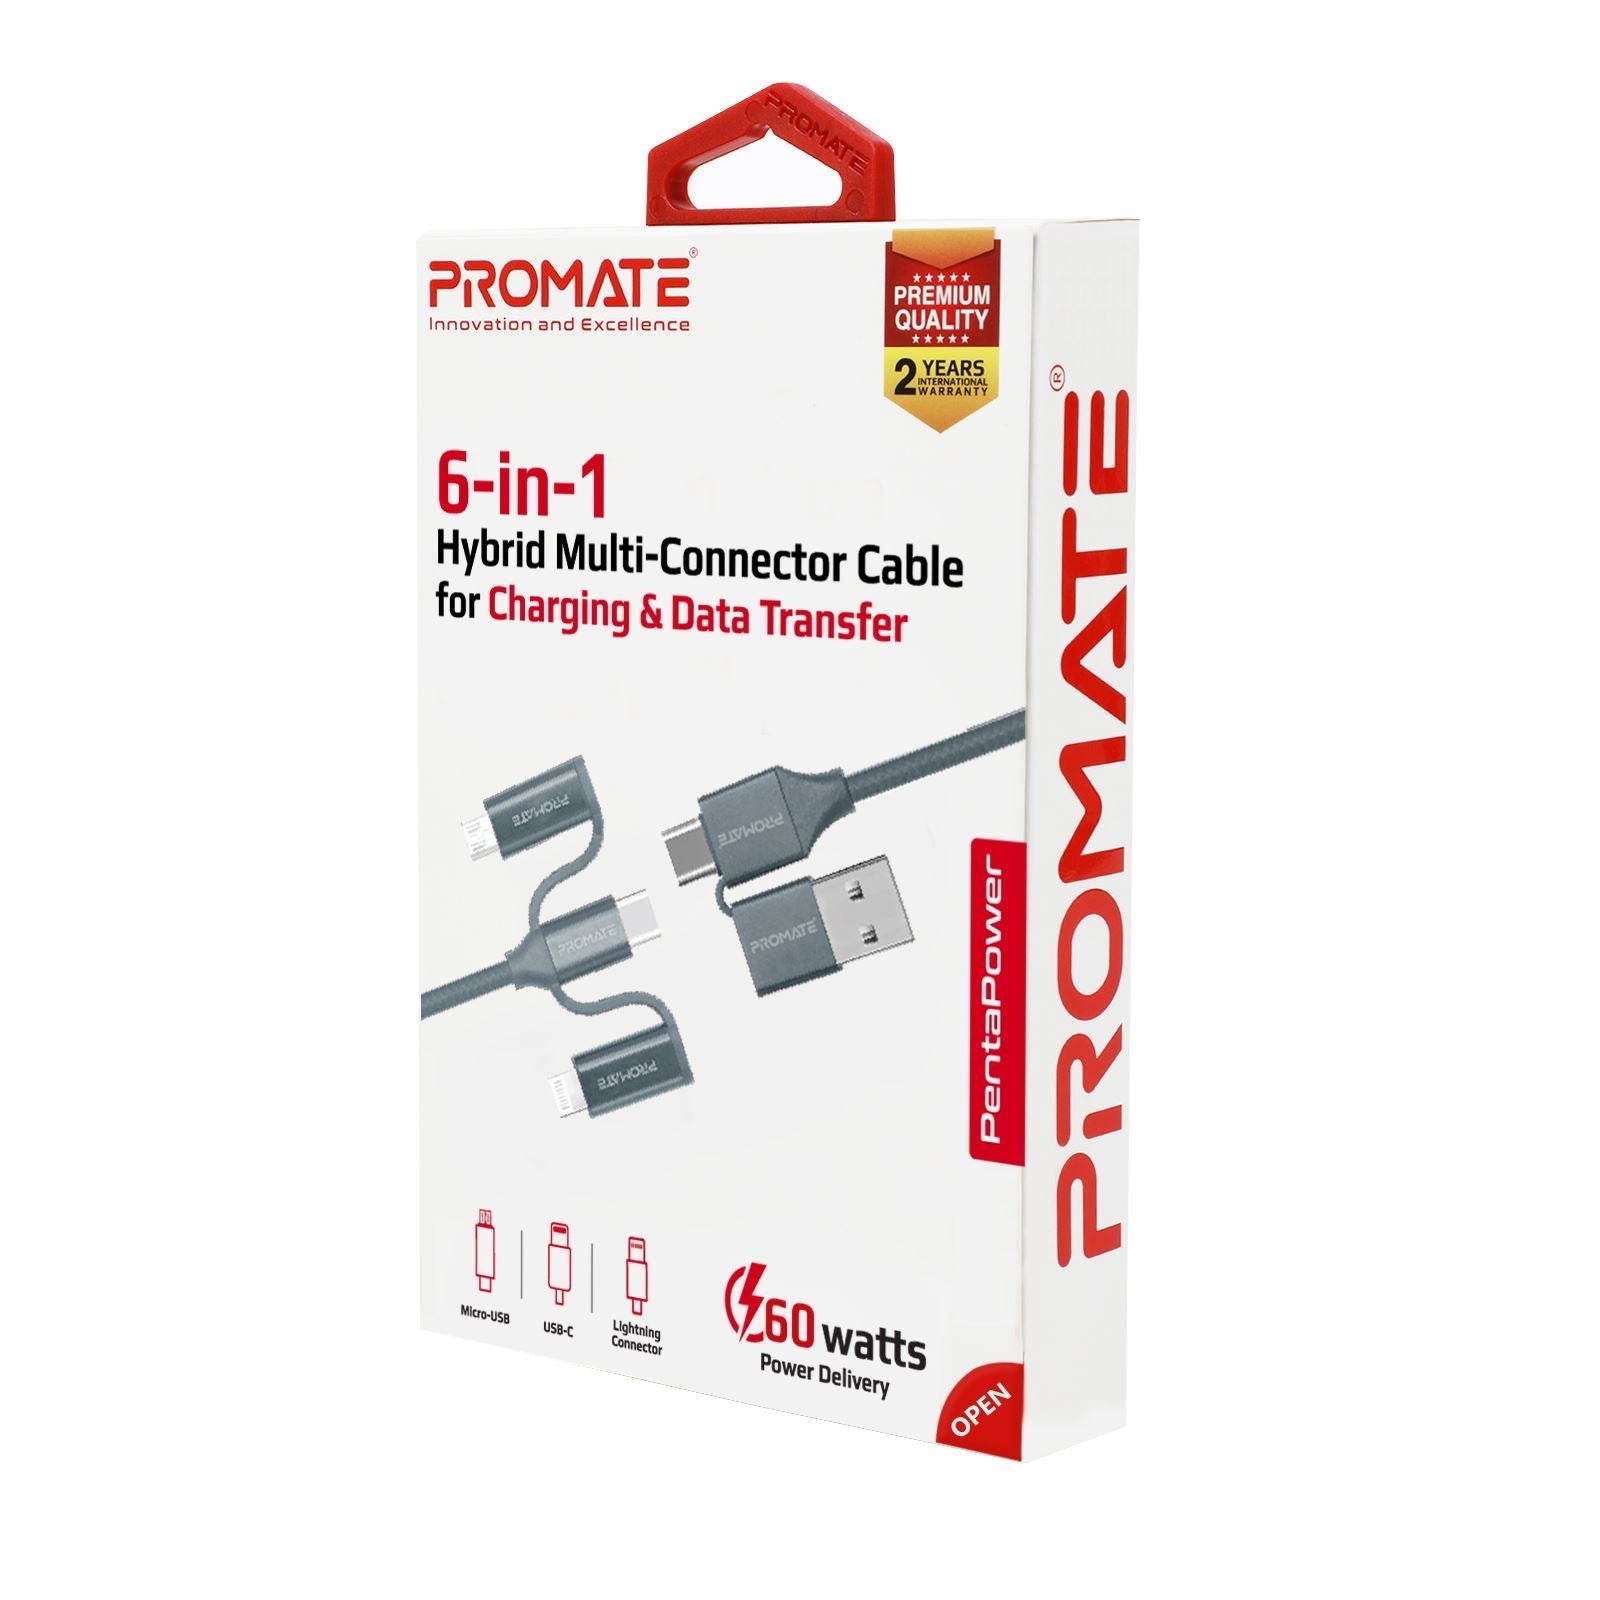 PROMATE_6-in1_Hybrid_1.2m_Multi-Connector_Cable_for_Charging_&_Data_Transfer._60W_Power_Delivery_USB-C_to_USB-C,_Micro-USB,_USB-C_Lightning_Connector._Grey_Colour. 1565